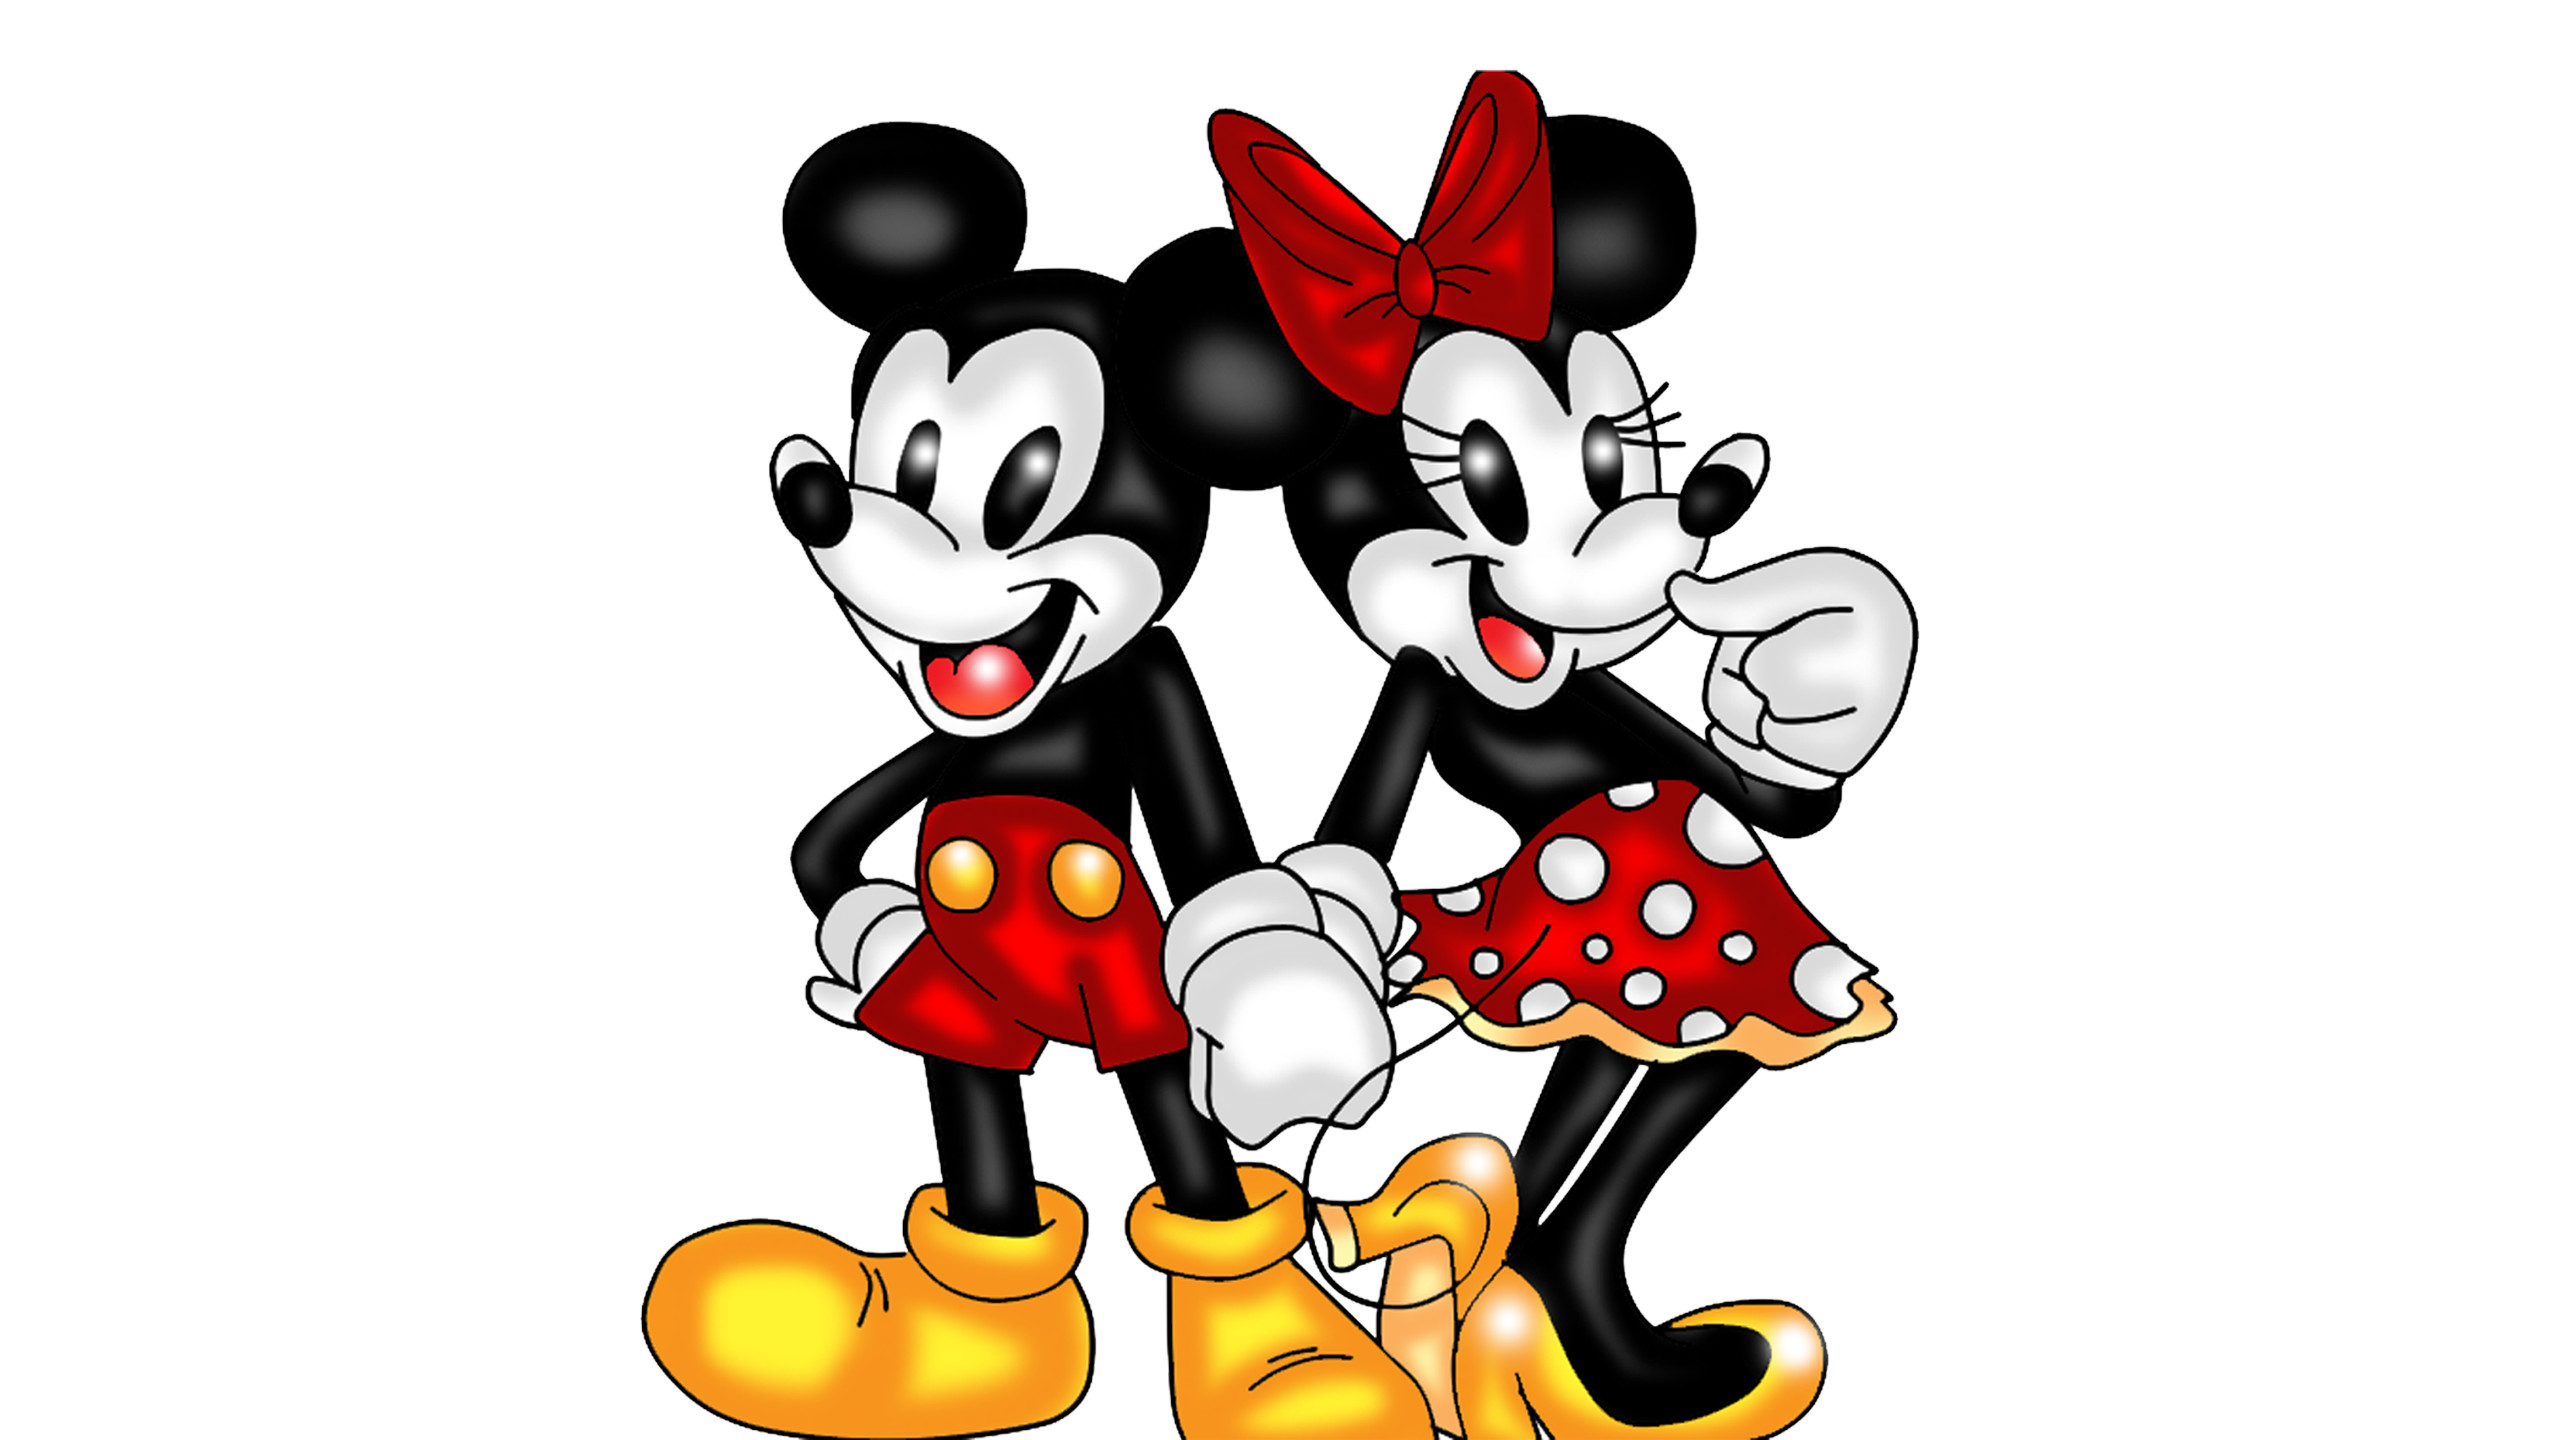 2560x1440 Mickey And Minnie Mouse Love Couple Wallpaper Hd : Wallpapers13.com